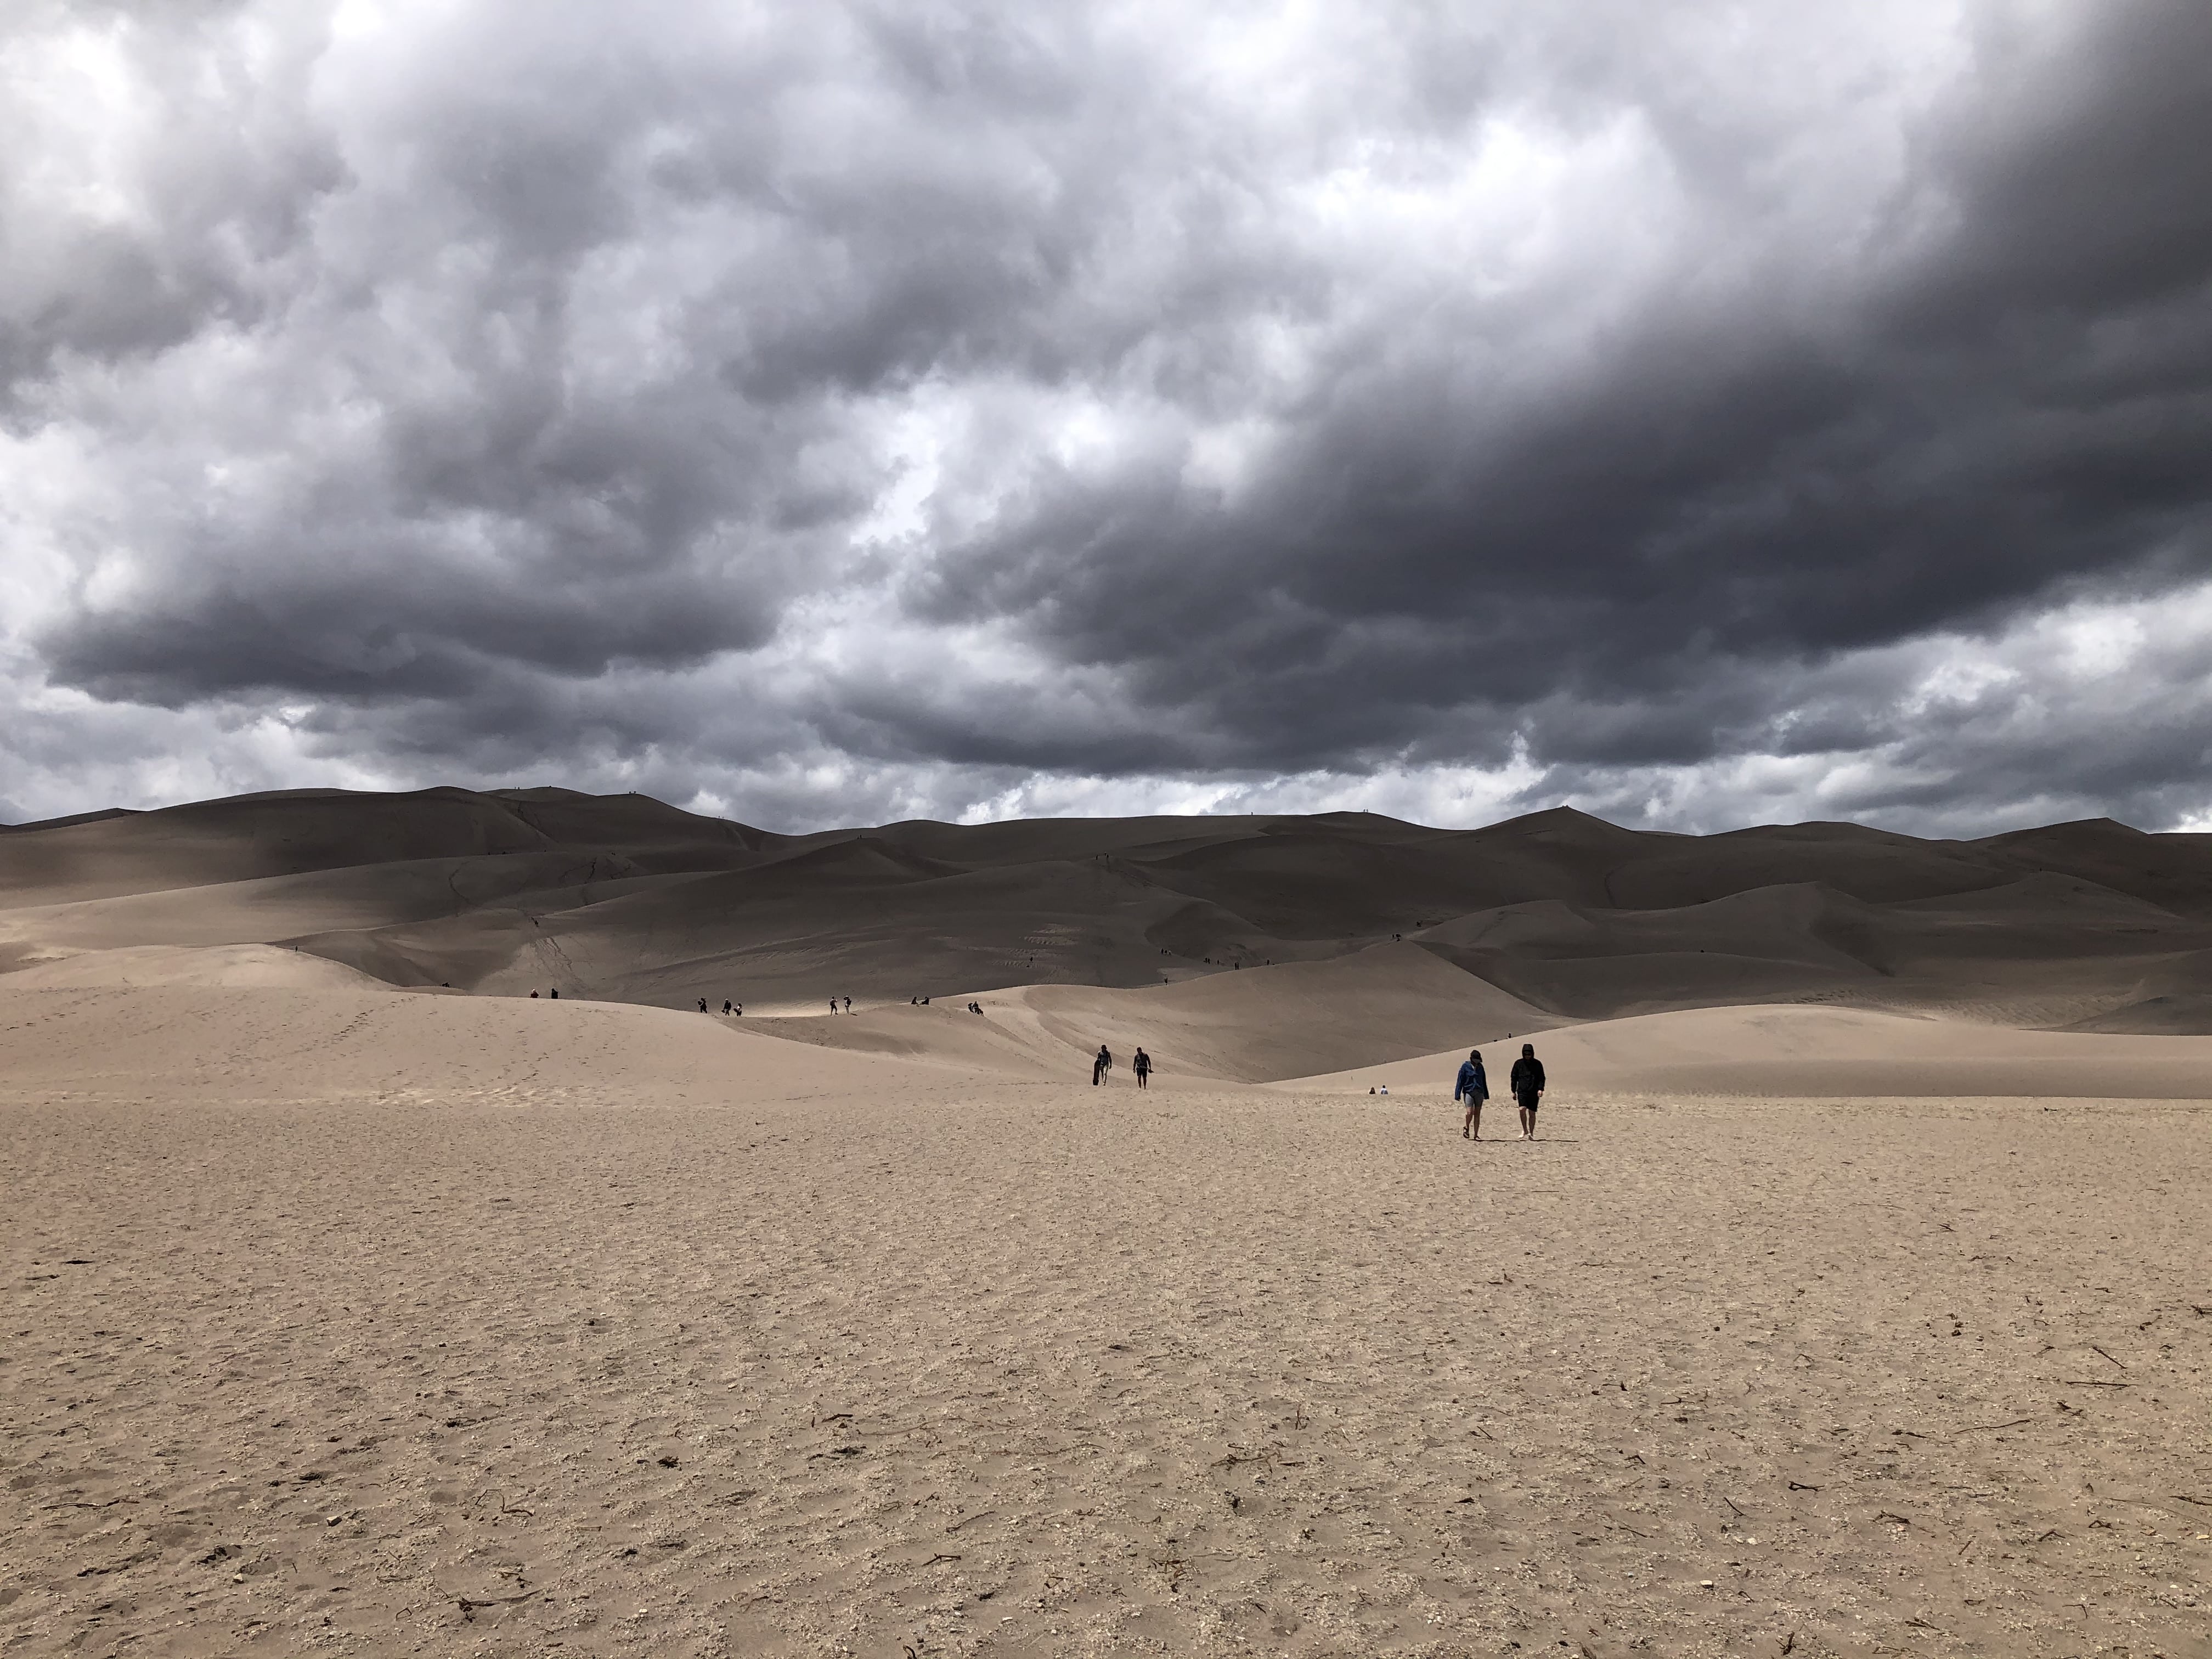 Clouds rolling in over the sand dunes